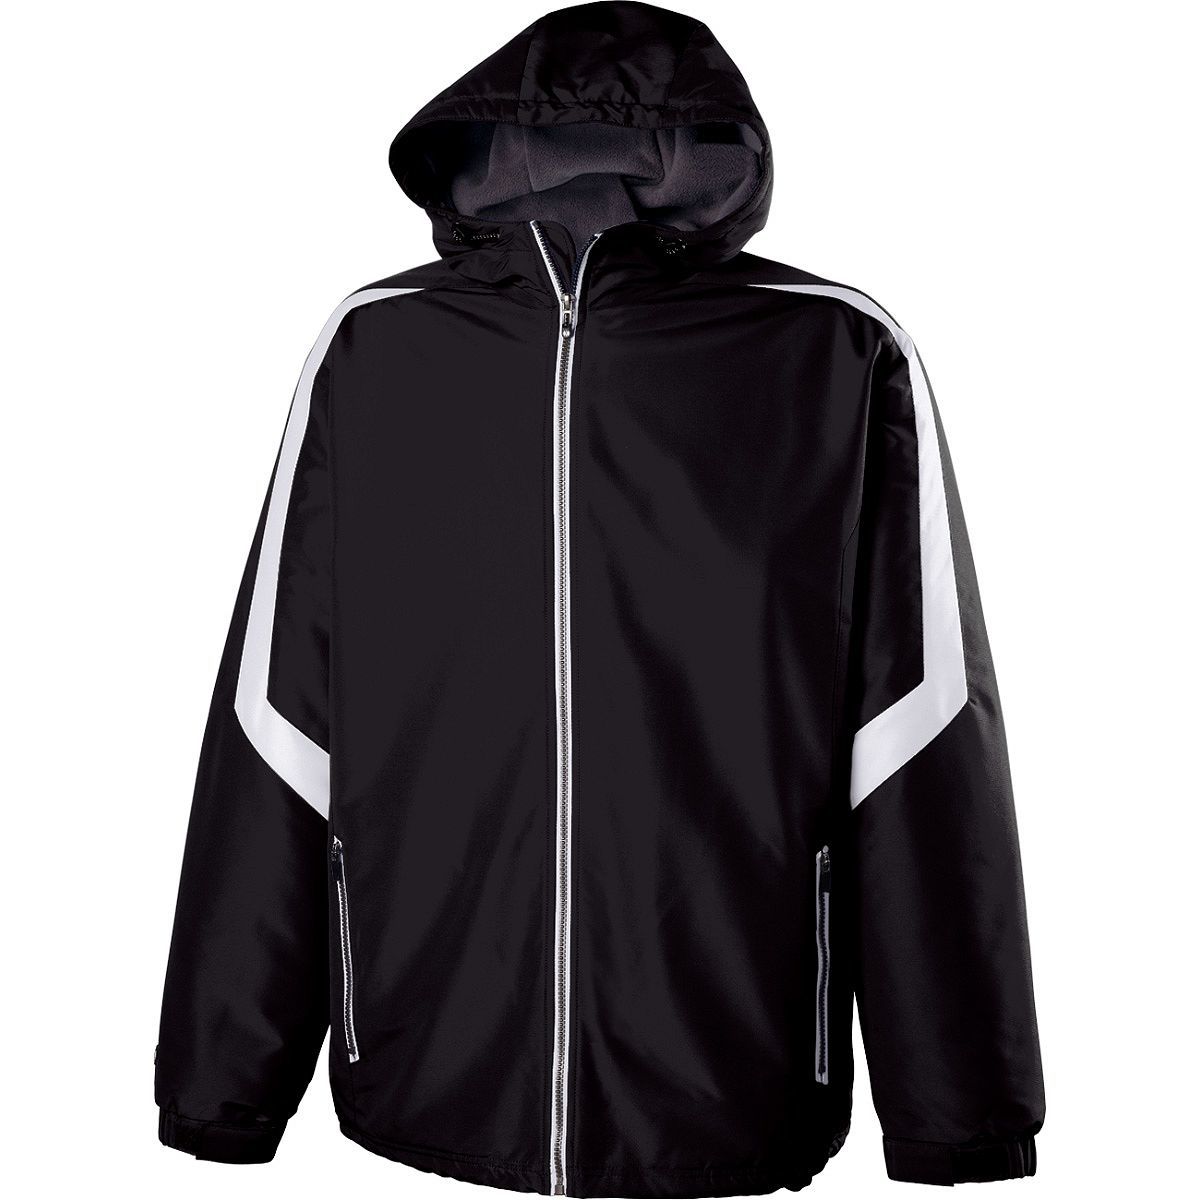 Holloway Sportswear 2XL Charger Jacket Black/White 229059 - image 4 of 4